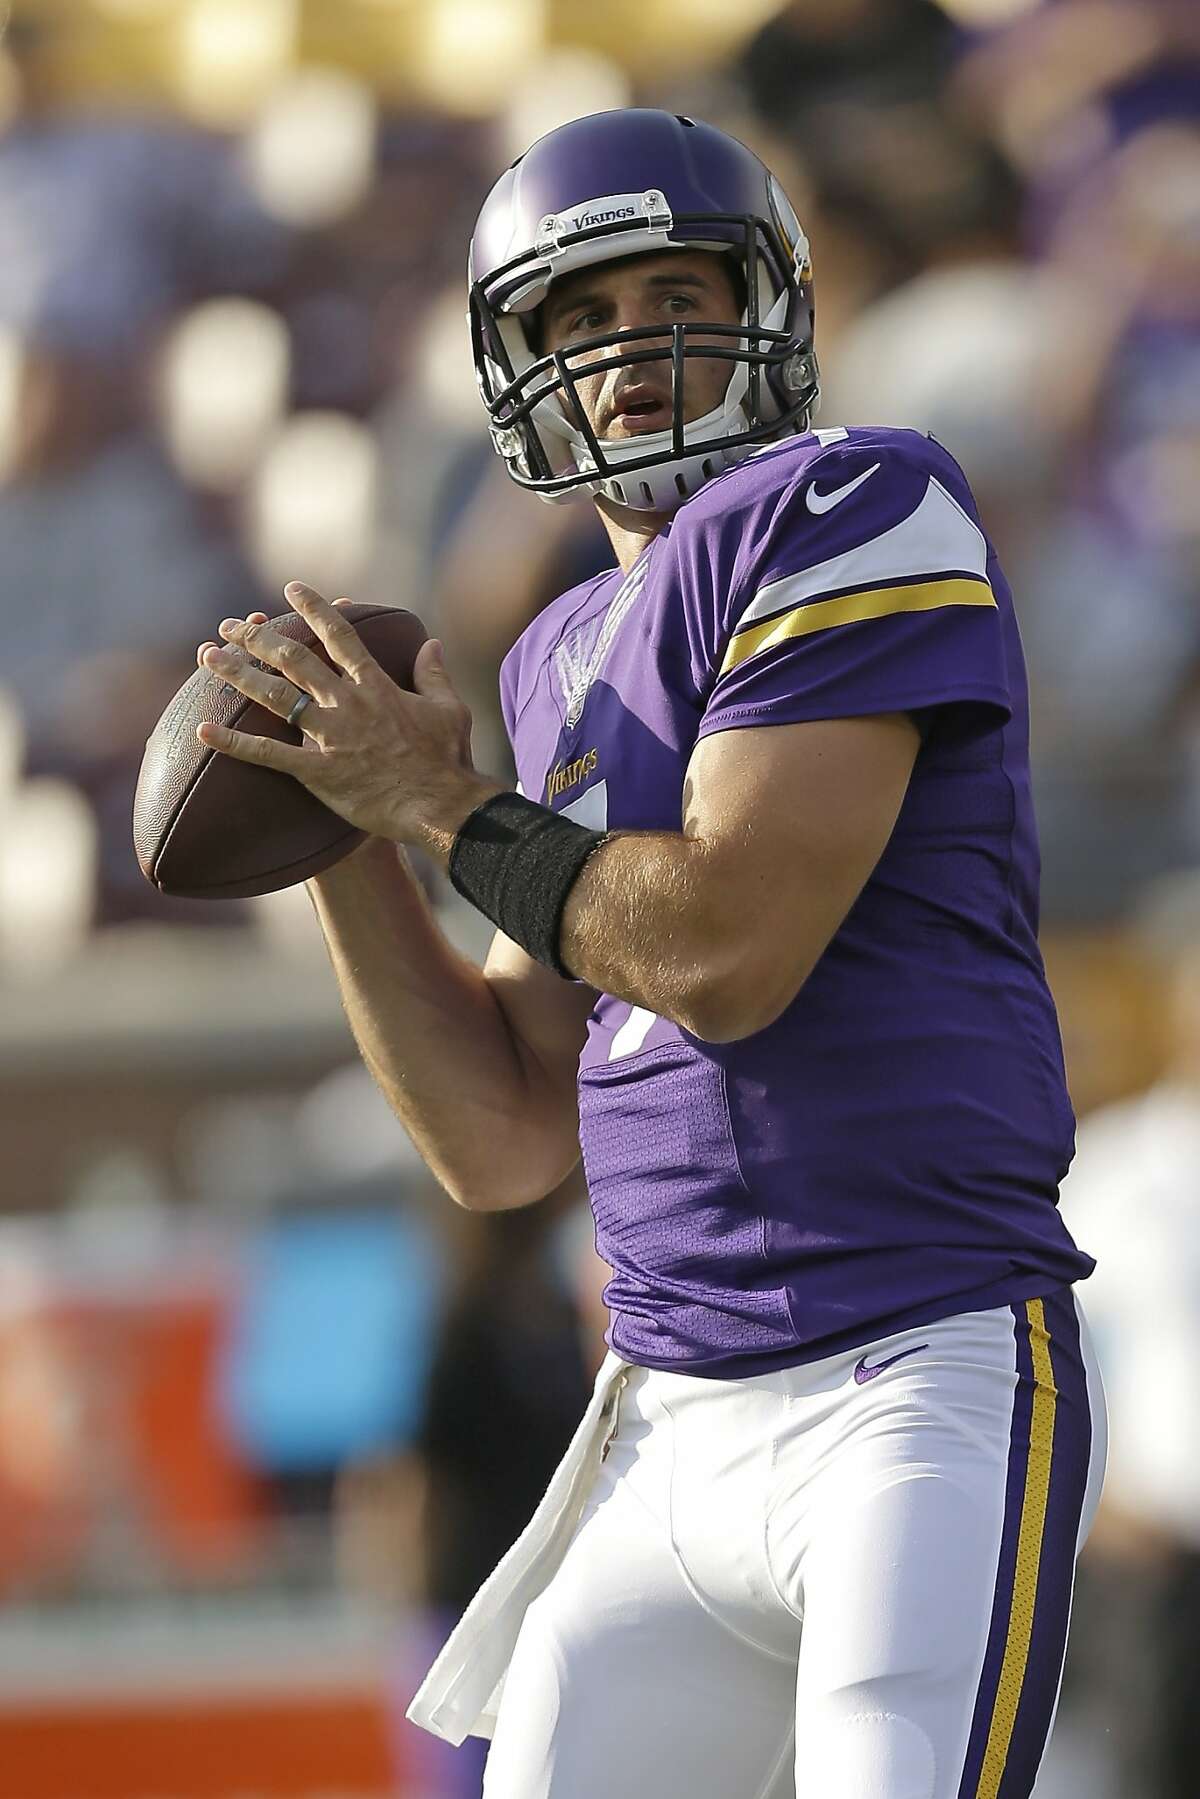 Minnesota Vikings Christian Ponder runs through some drills before the game against the Oakland Raiders, Friday, Aug. 8, 2014 in Minneapolis. (Mike McGinnis/AP Images for Panini)